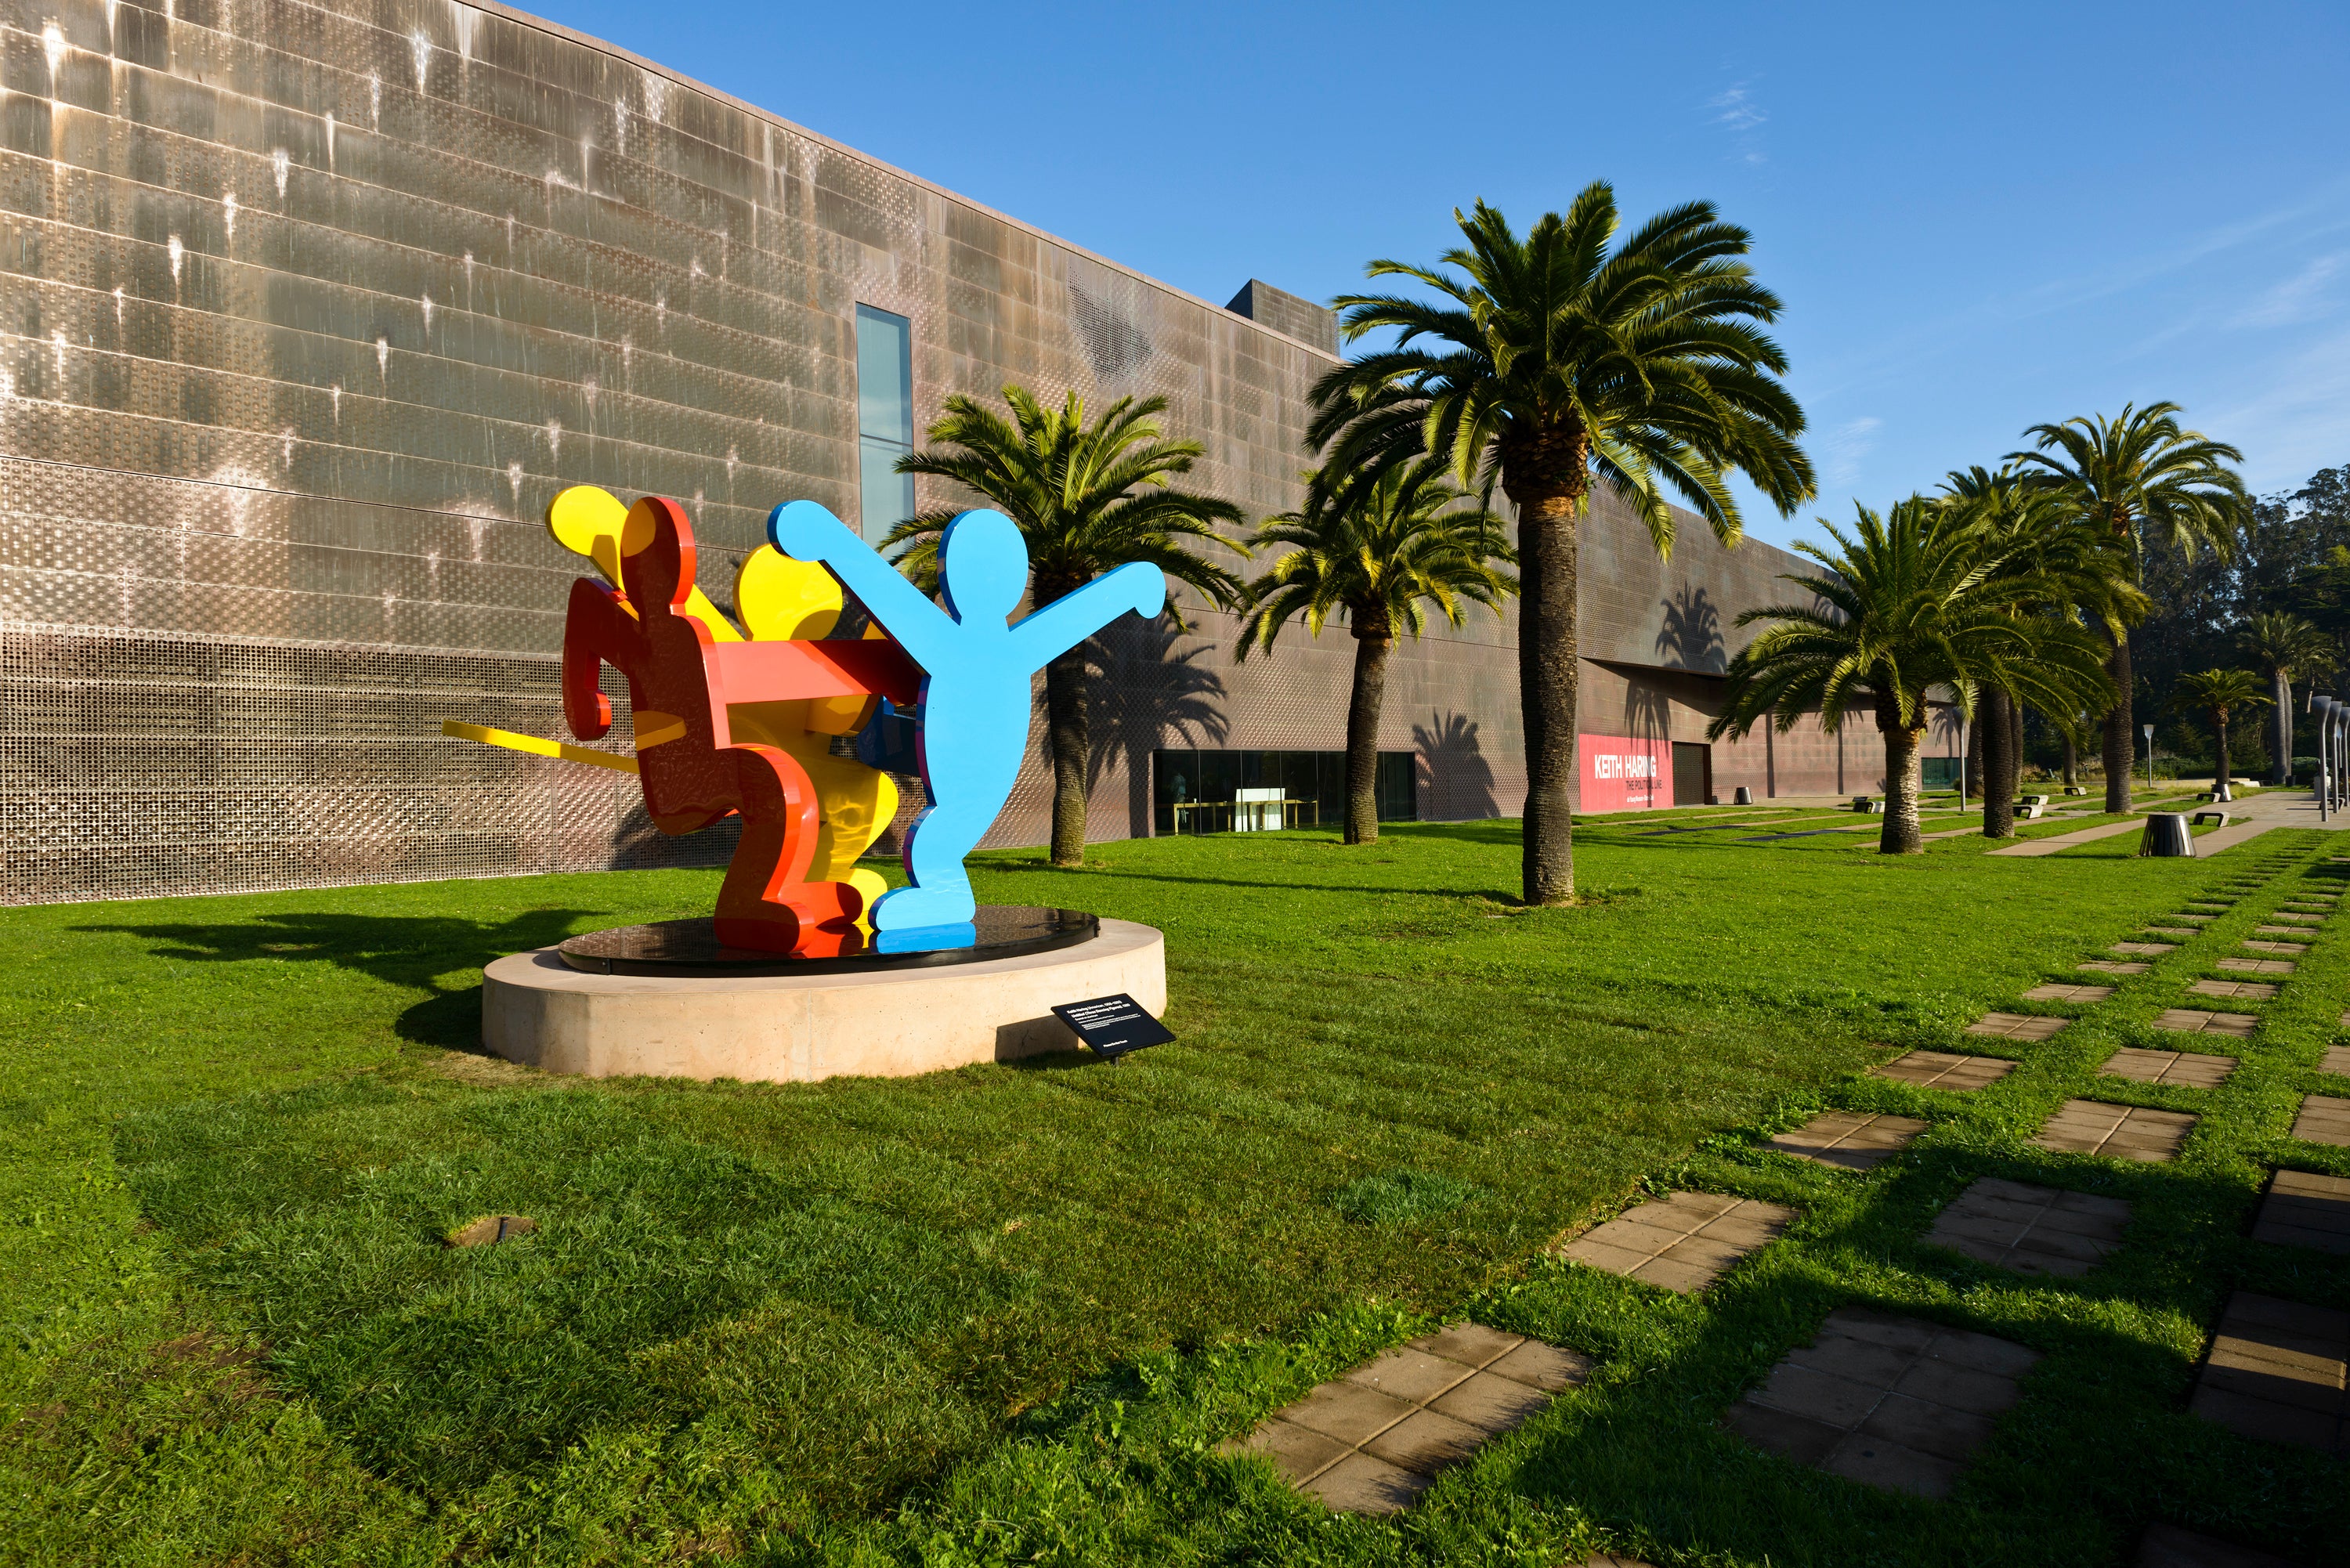 Keith Haring sculpture in front of the de Young museum